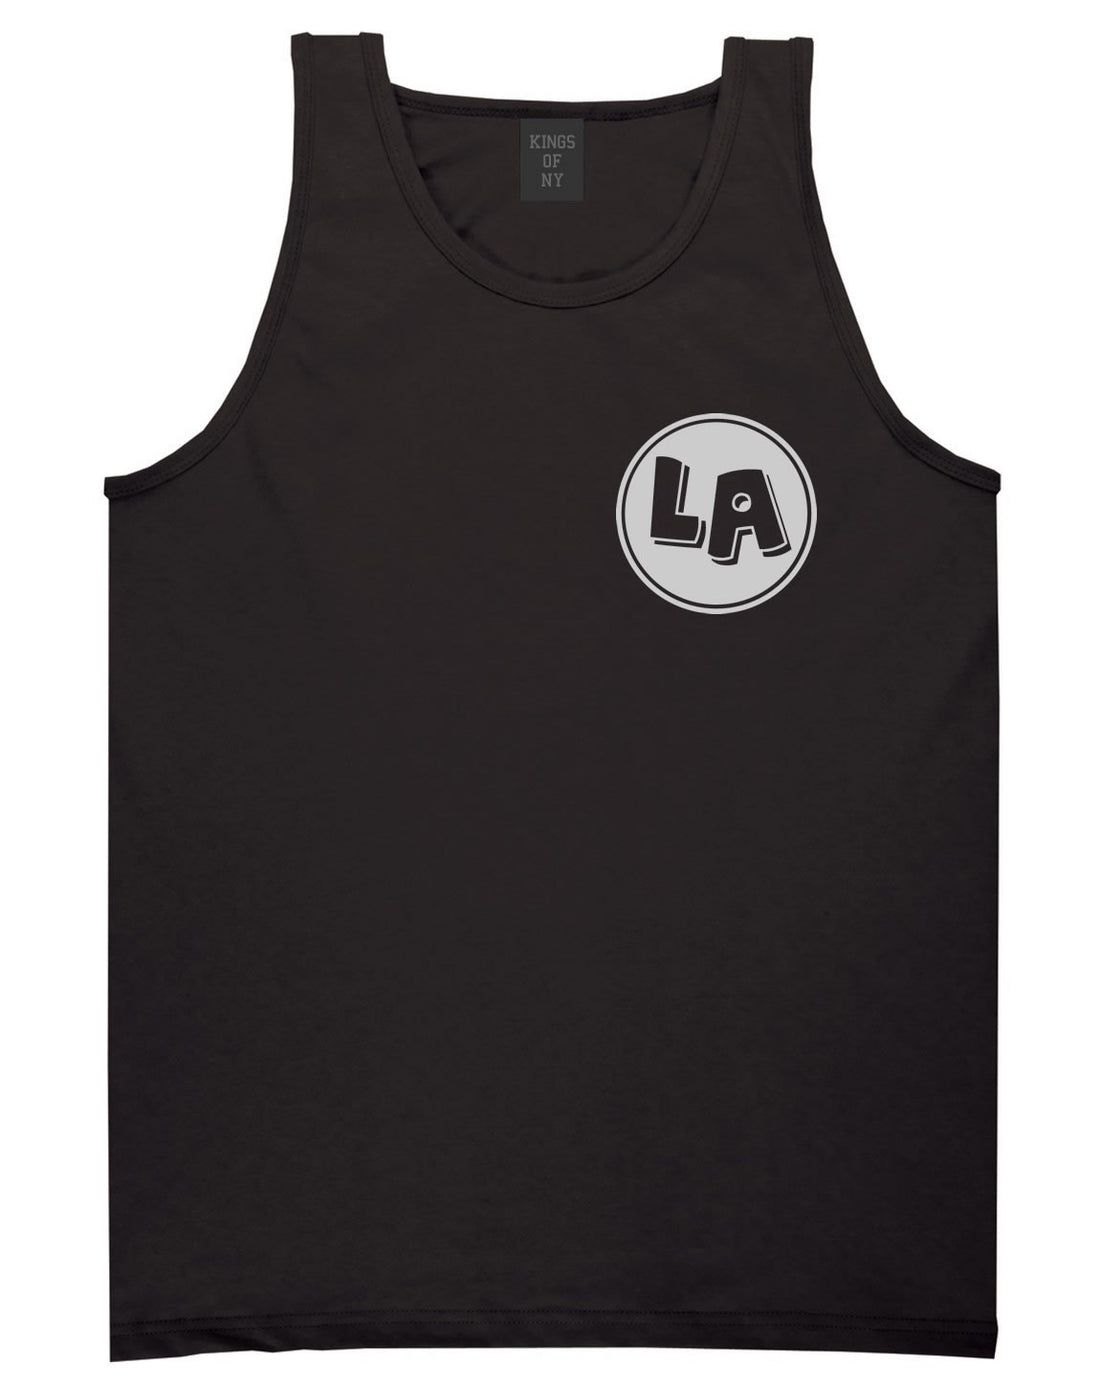 LA Circle Chest Los Angeles Tank Top in Black By Kings Of NY